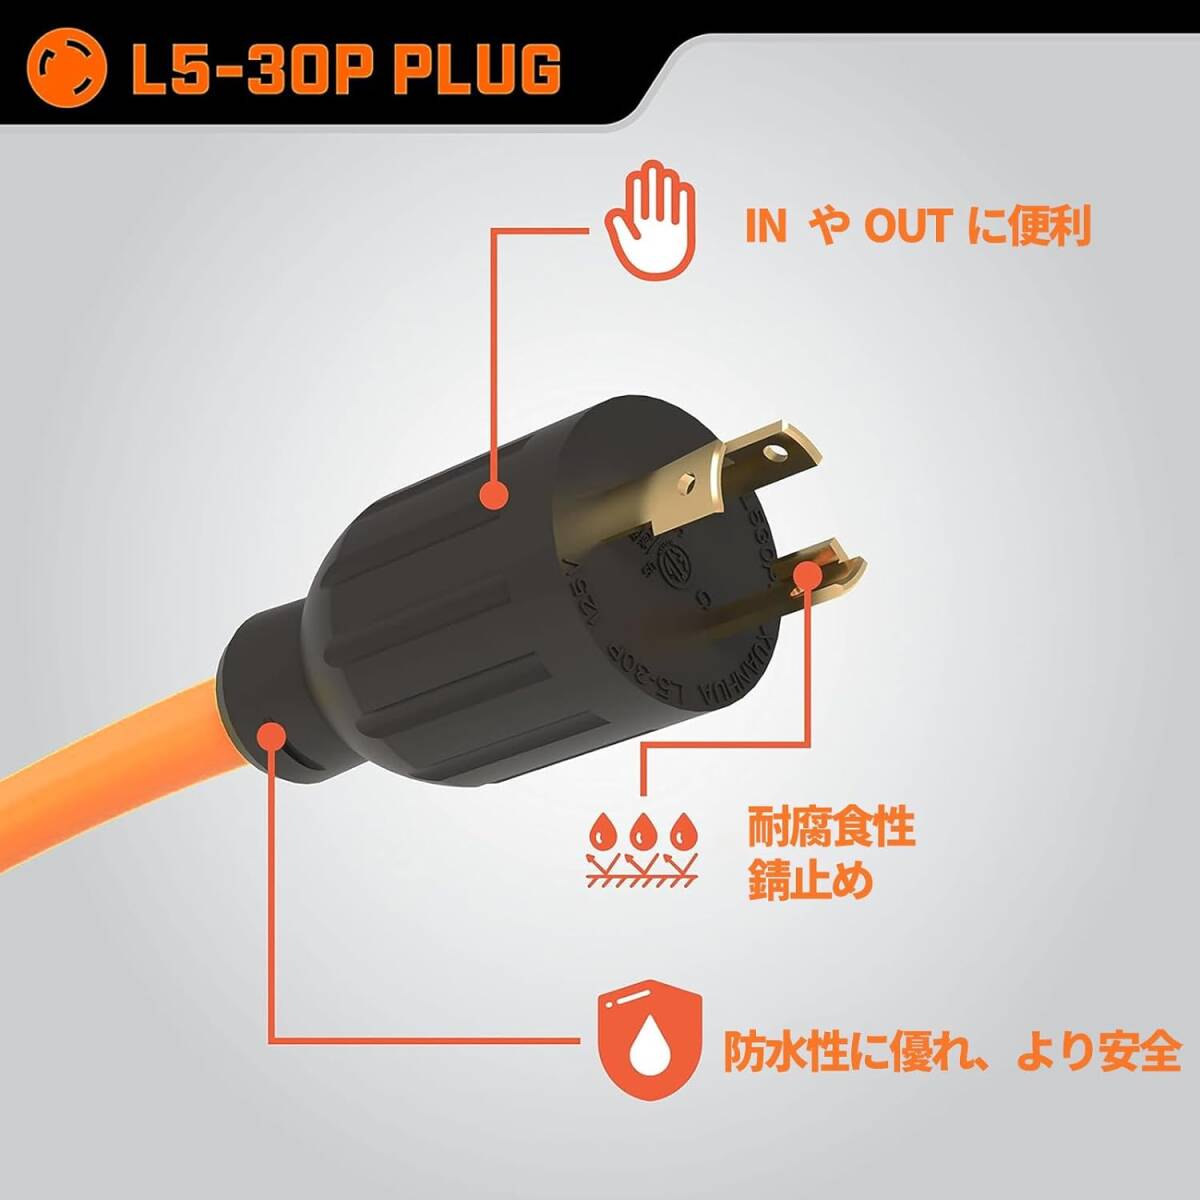  generator code adapter generator extender power cord twist lock L5-30P~5-15R*3 30A voltage 100-240V home use business use 